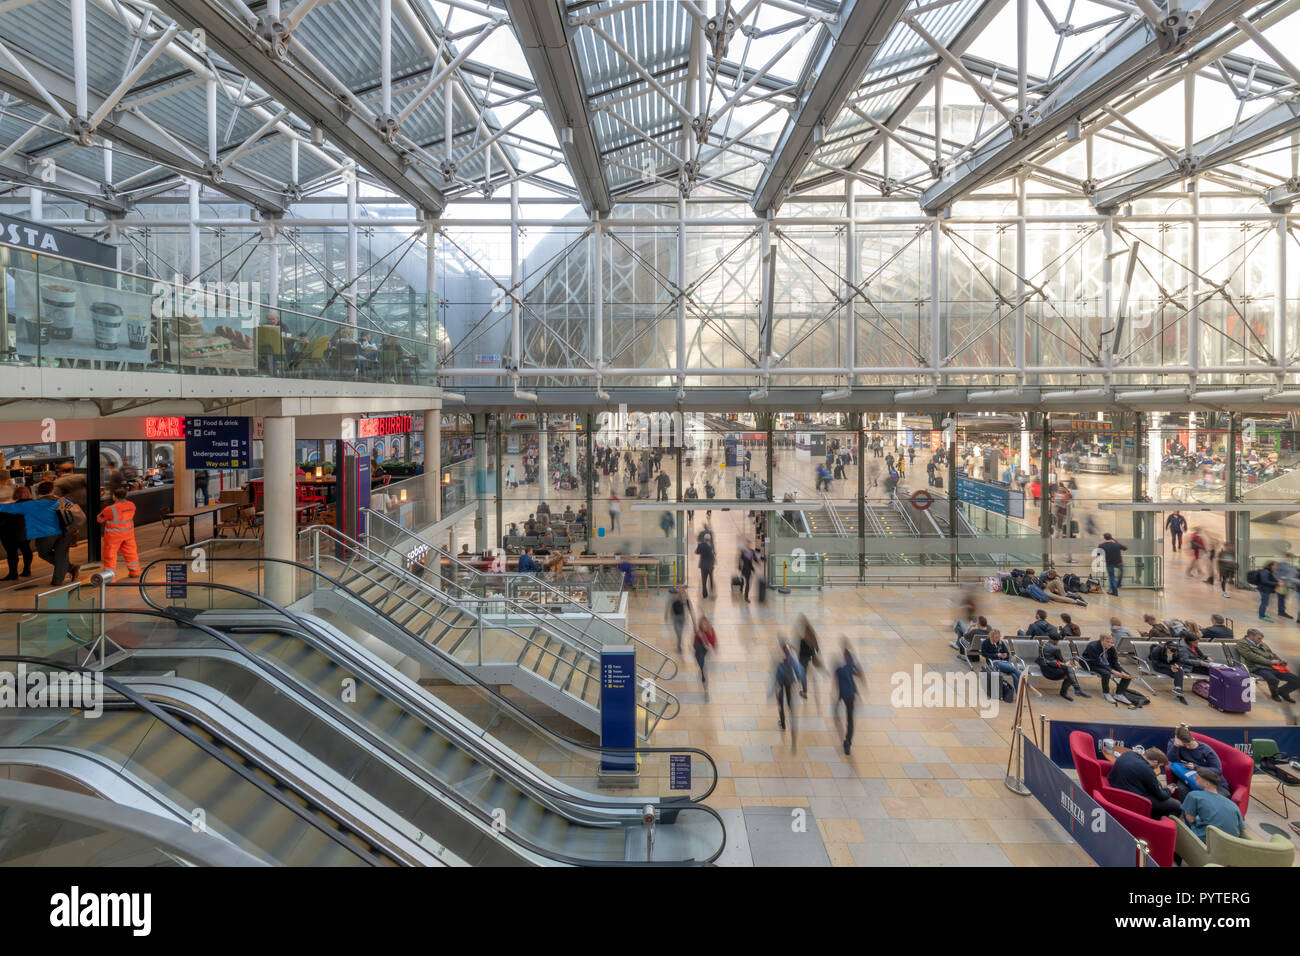 Busy London Paddington Station. The start of the Great Western Railway GWR, created by Brunel. Stock Photo